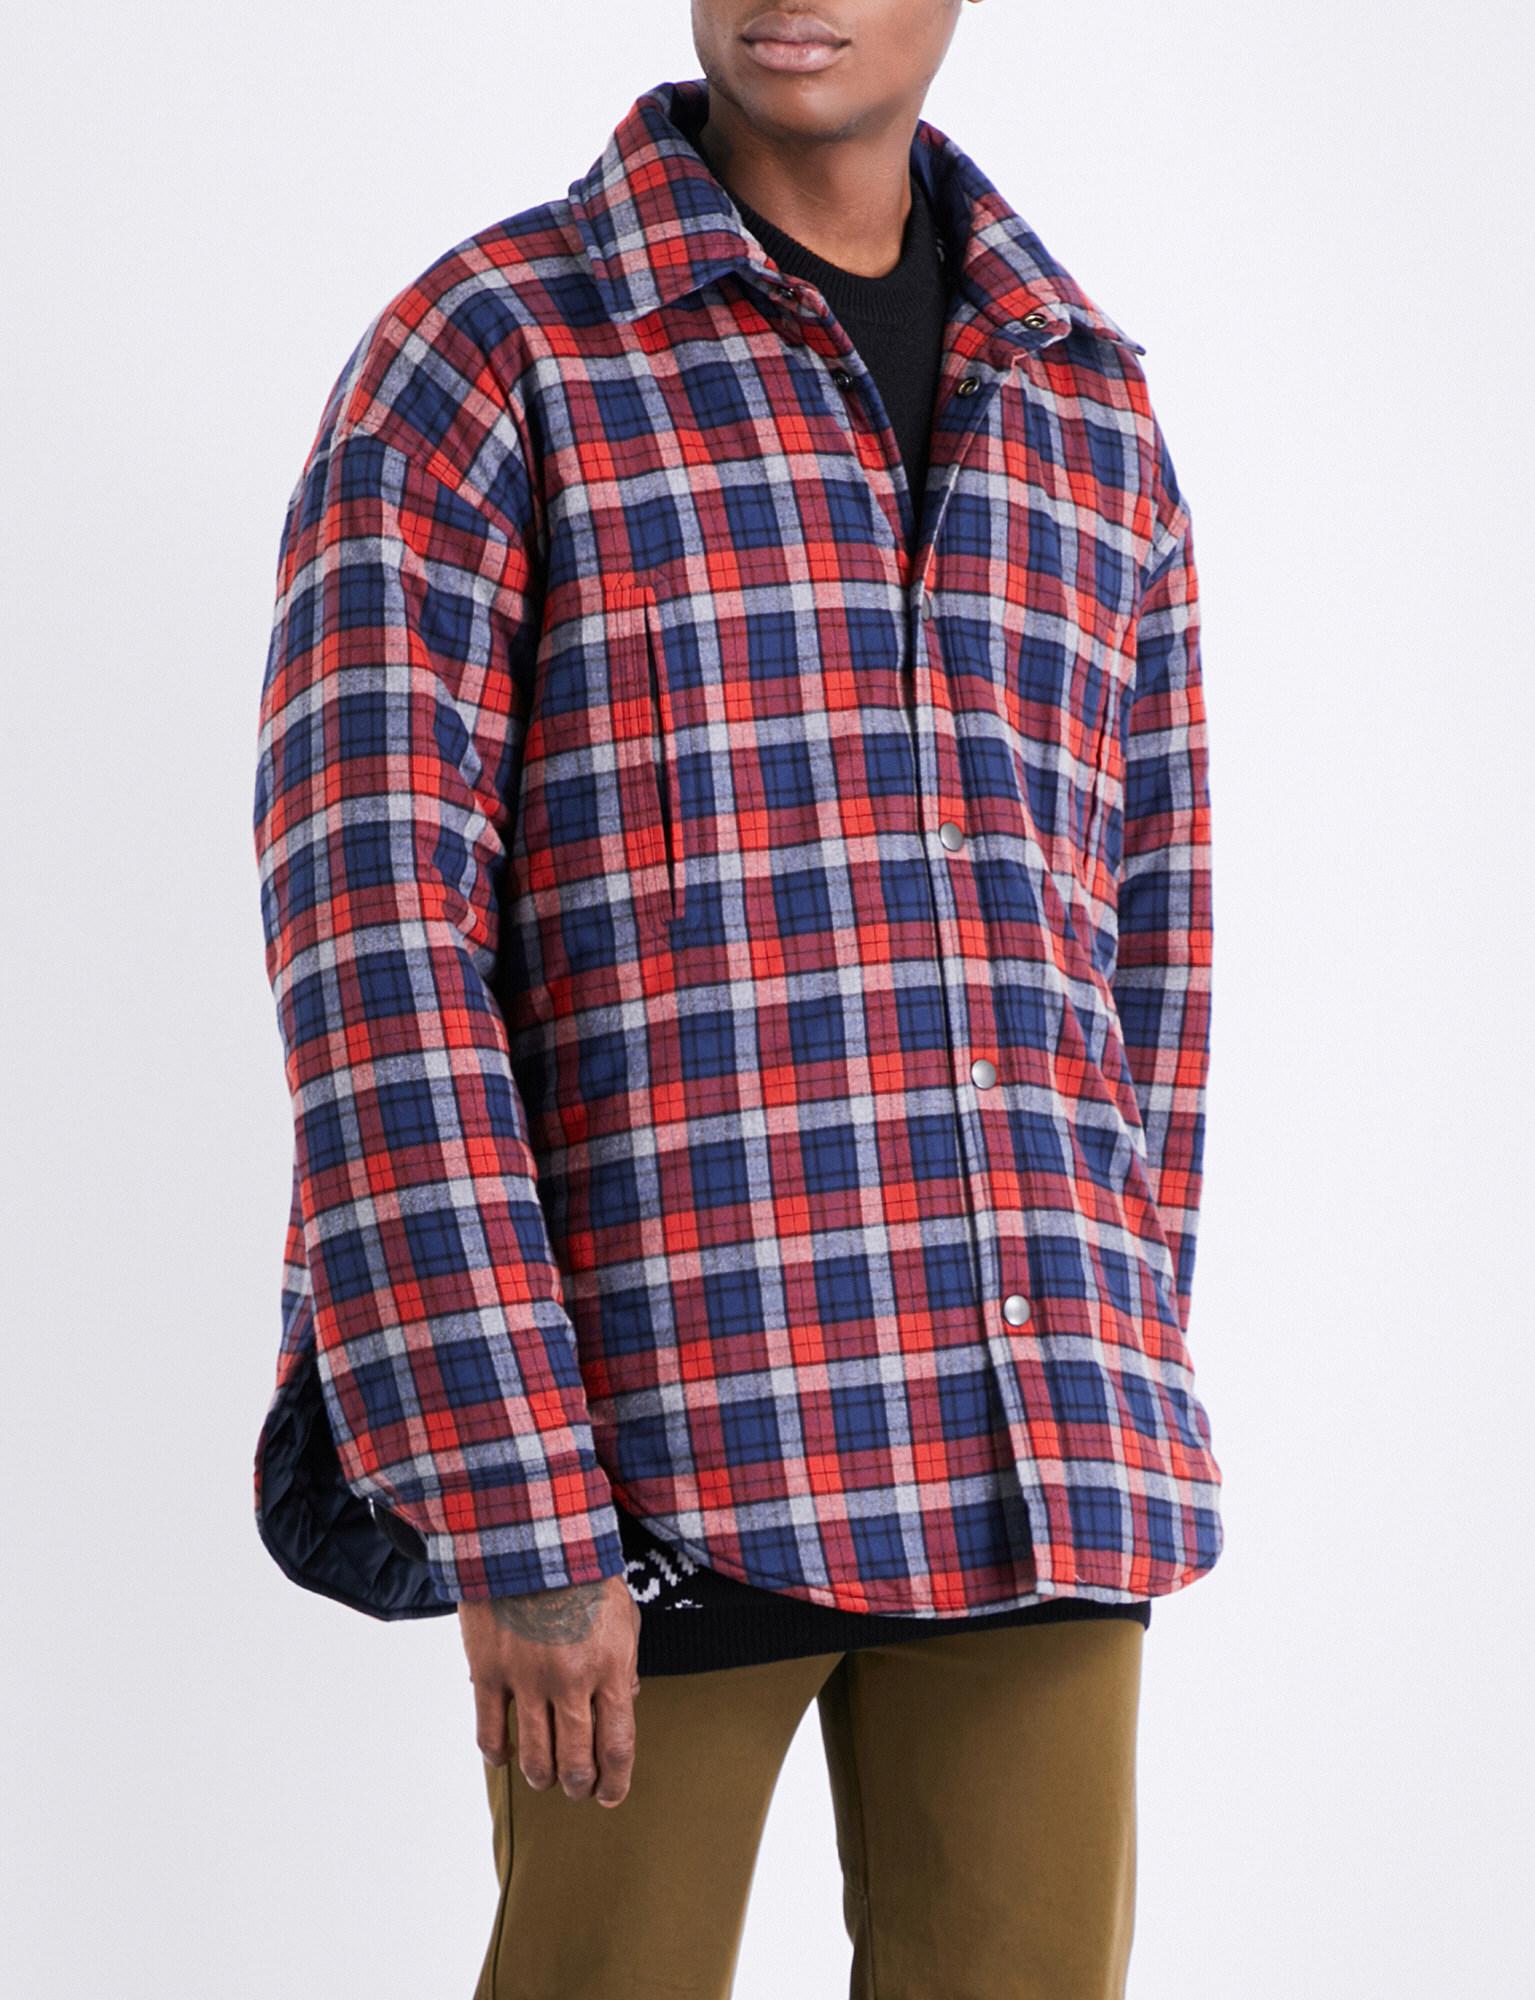 Balenciaga Check-pattern Cotton Peacoat Overshirt in Red for Men - Lyst